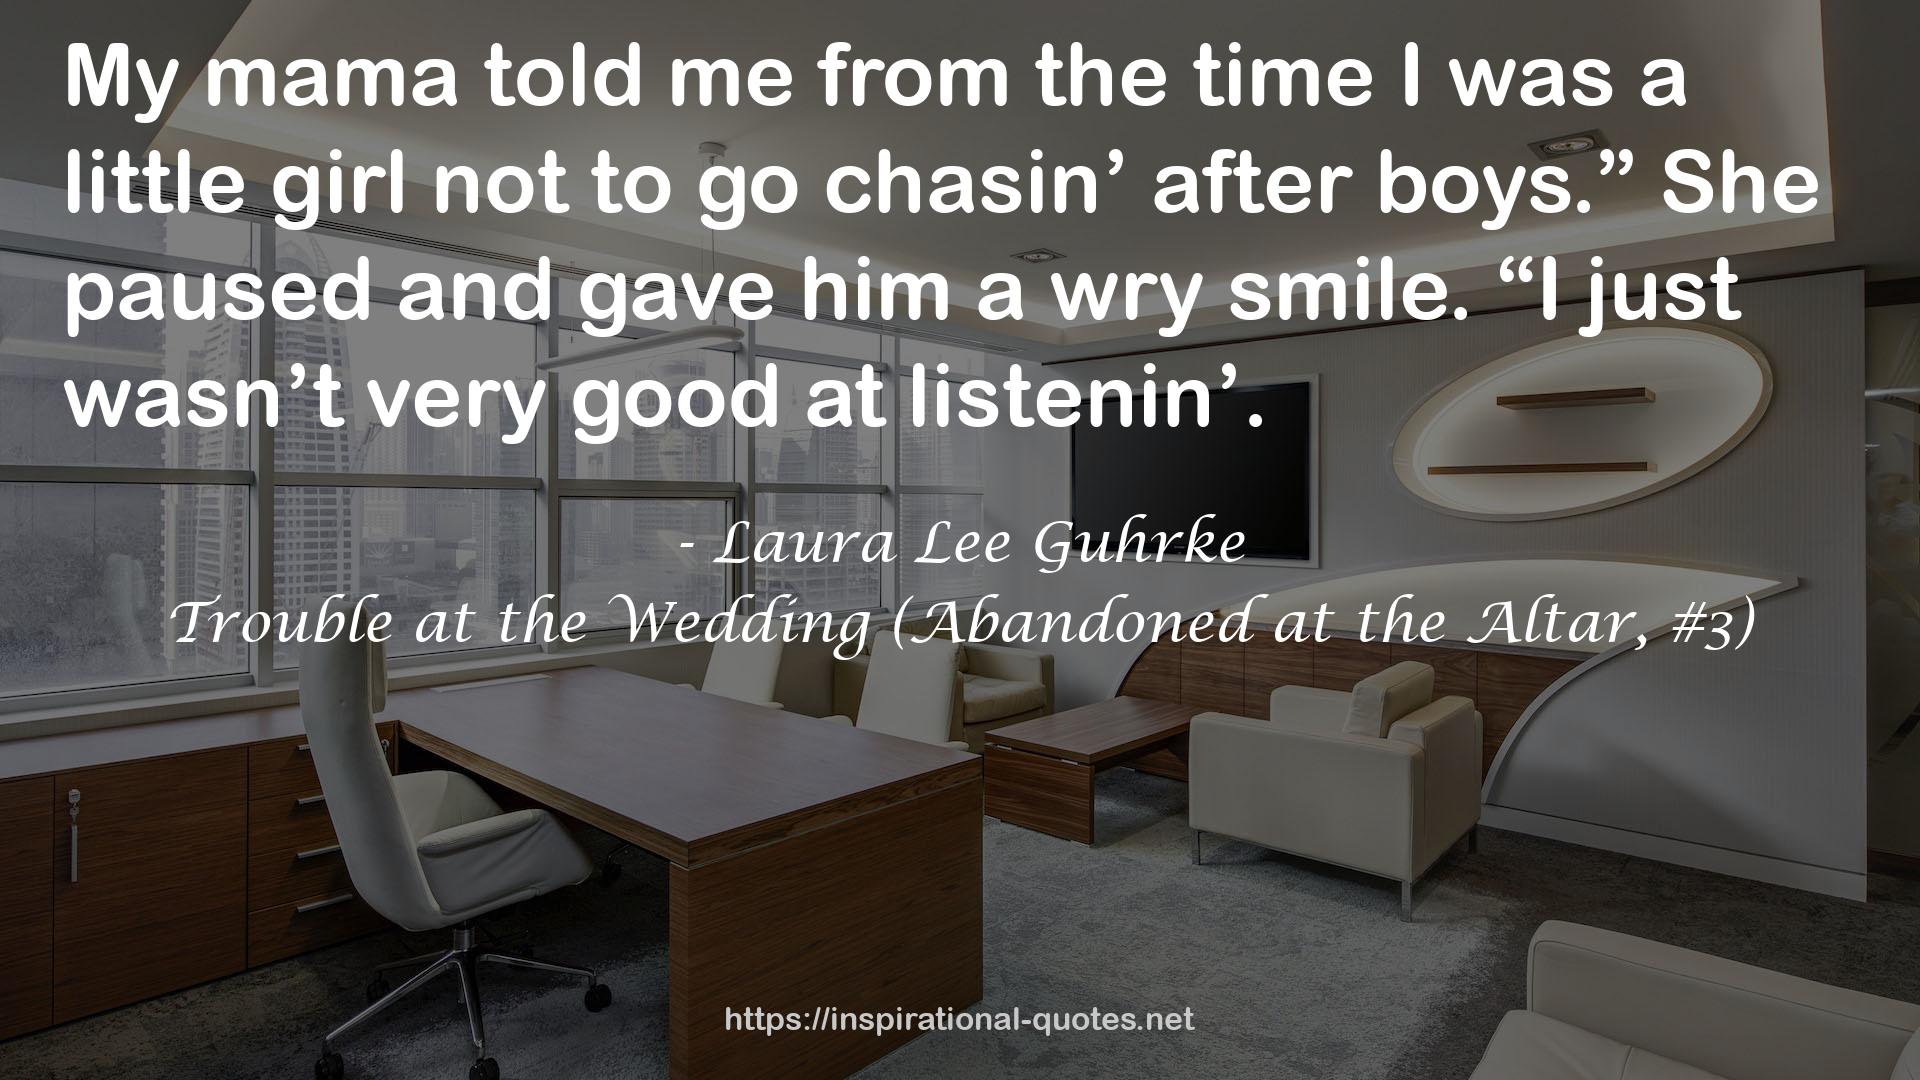 Trouble at the Wedding (Abandoned at the Altar, #3) QUOTES